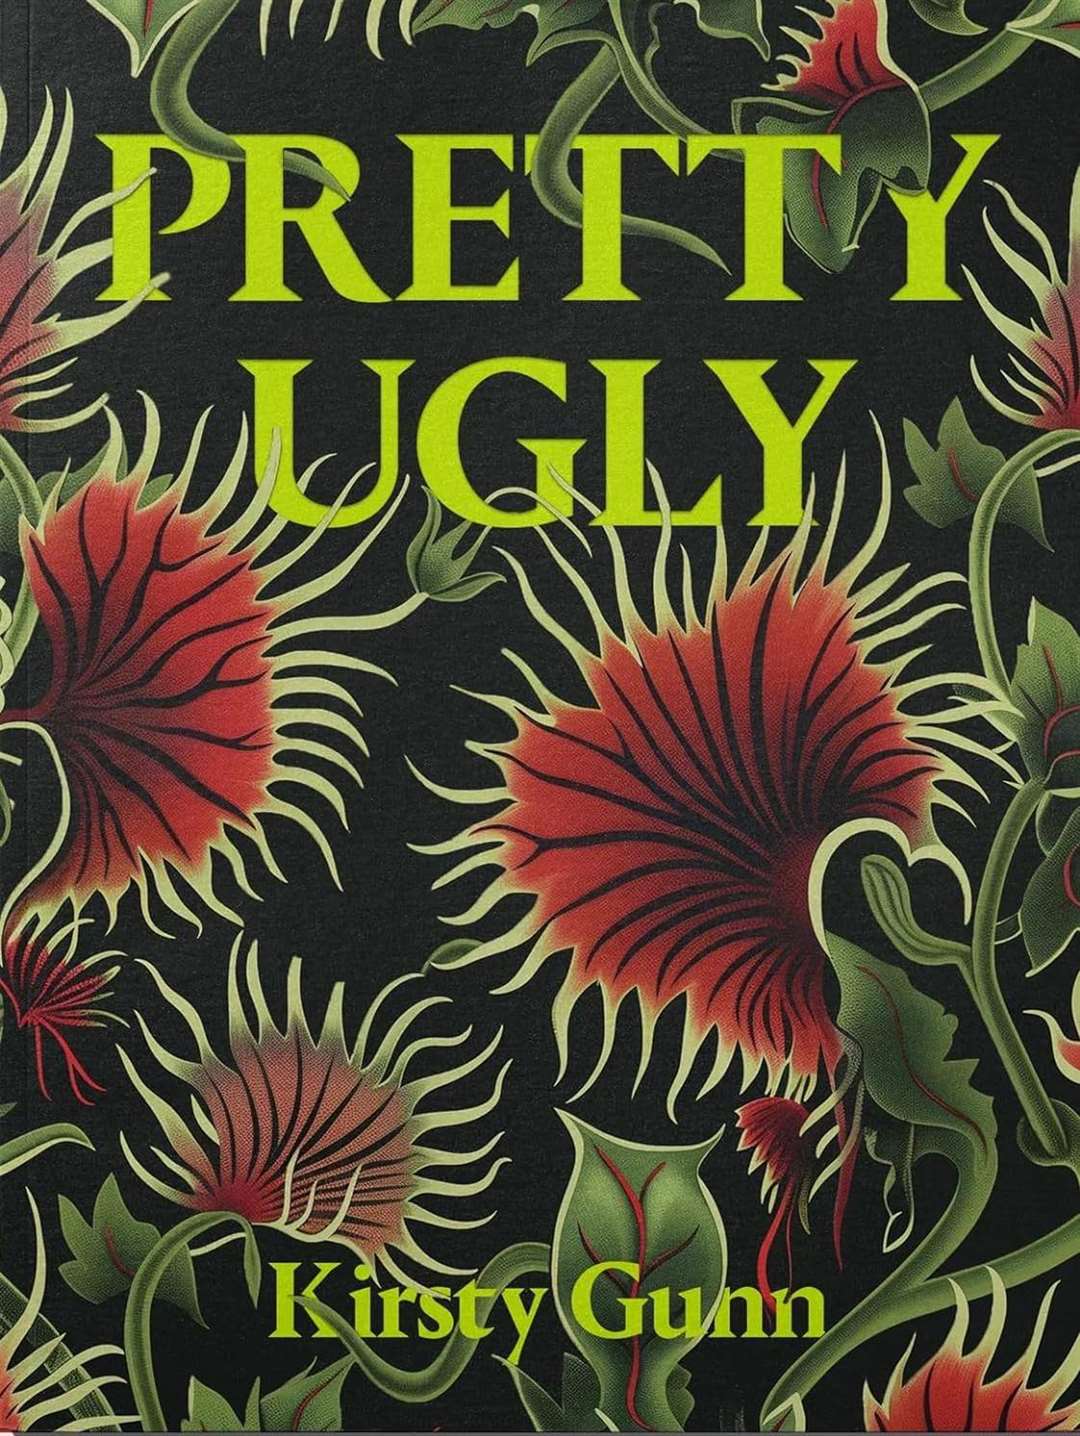 Kirsty Gunn's new collection of short stories is called 'Pretty Ugly'.